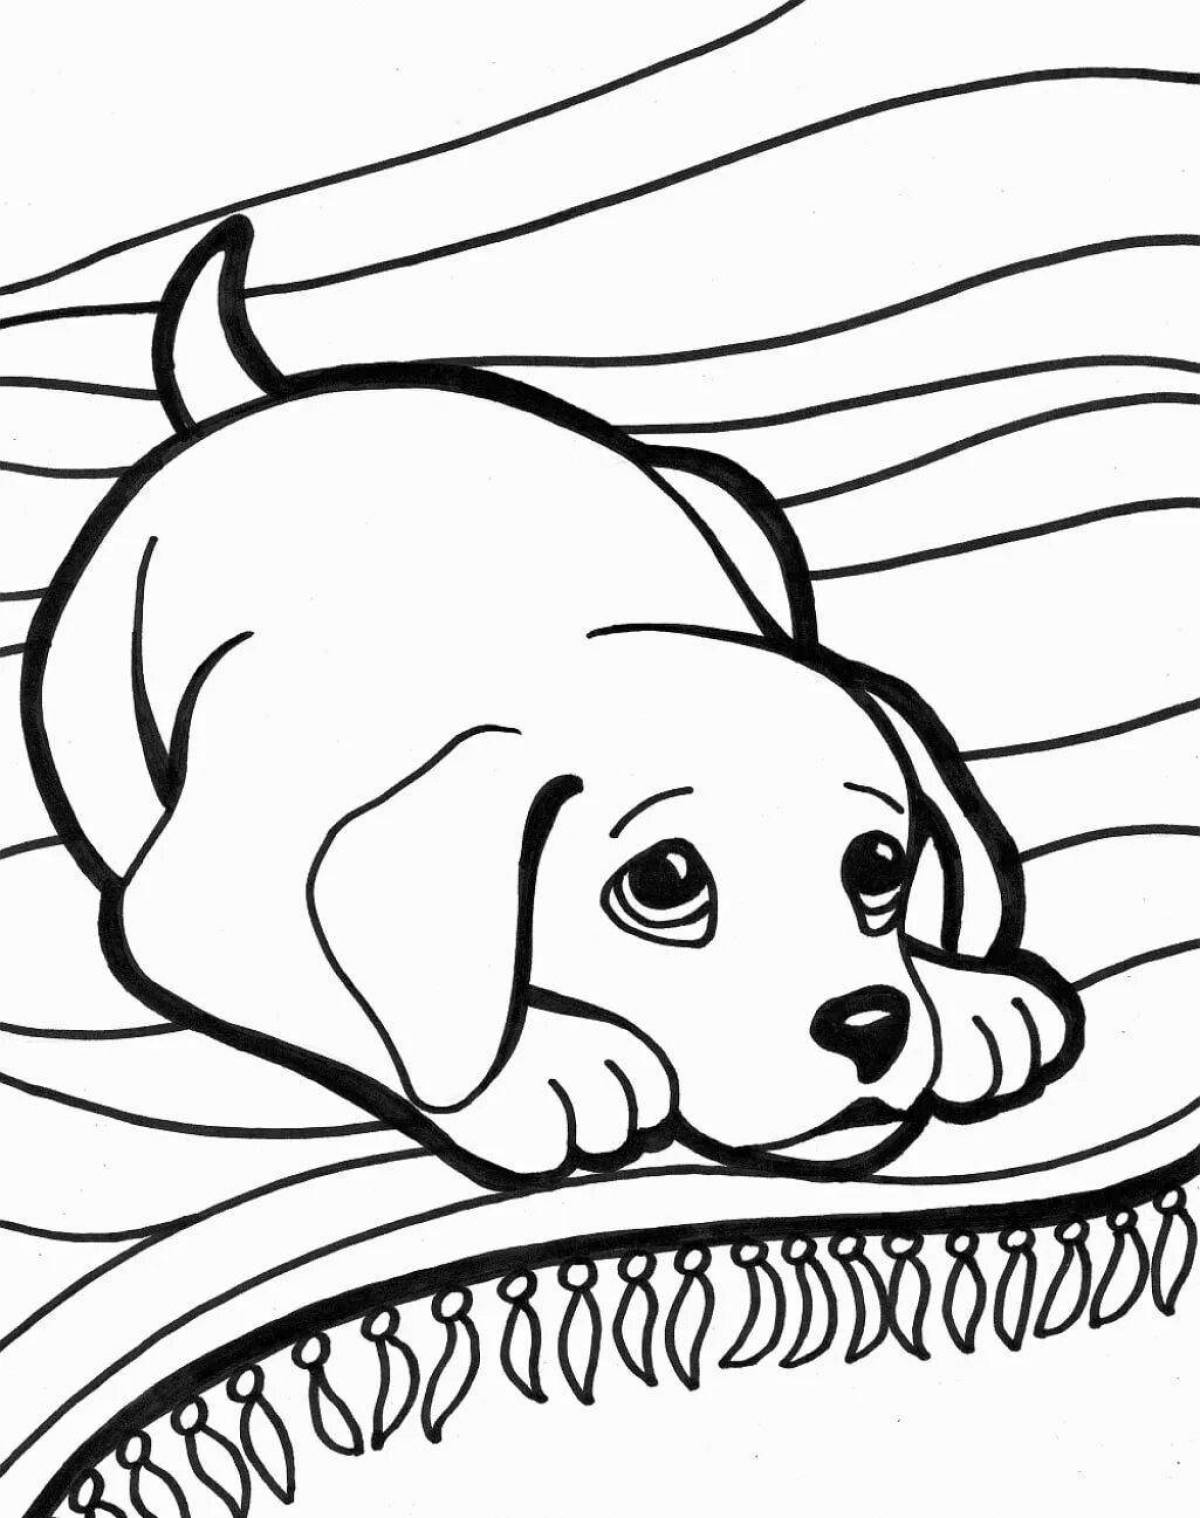 A playful coloring book for 11 year old animals